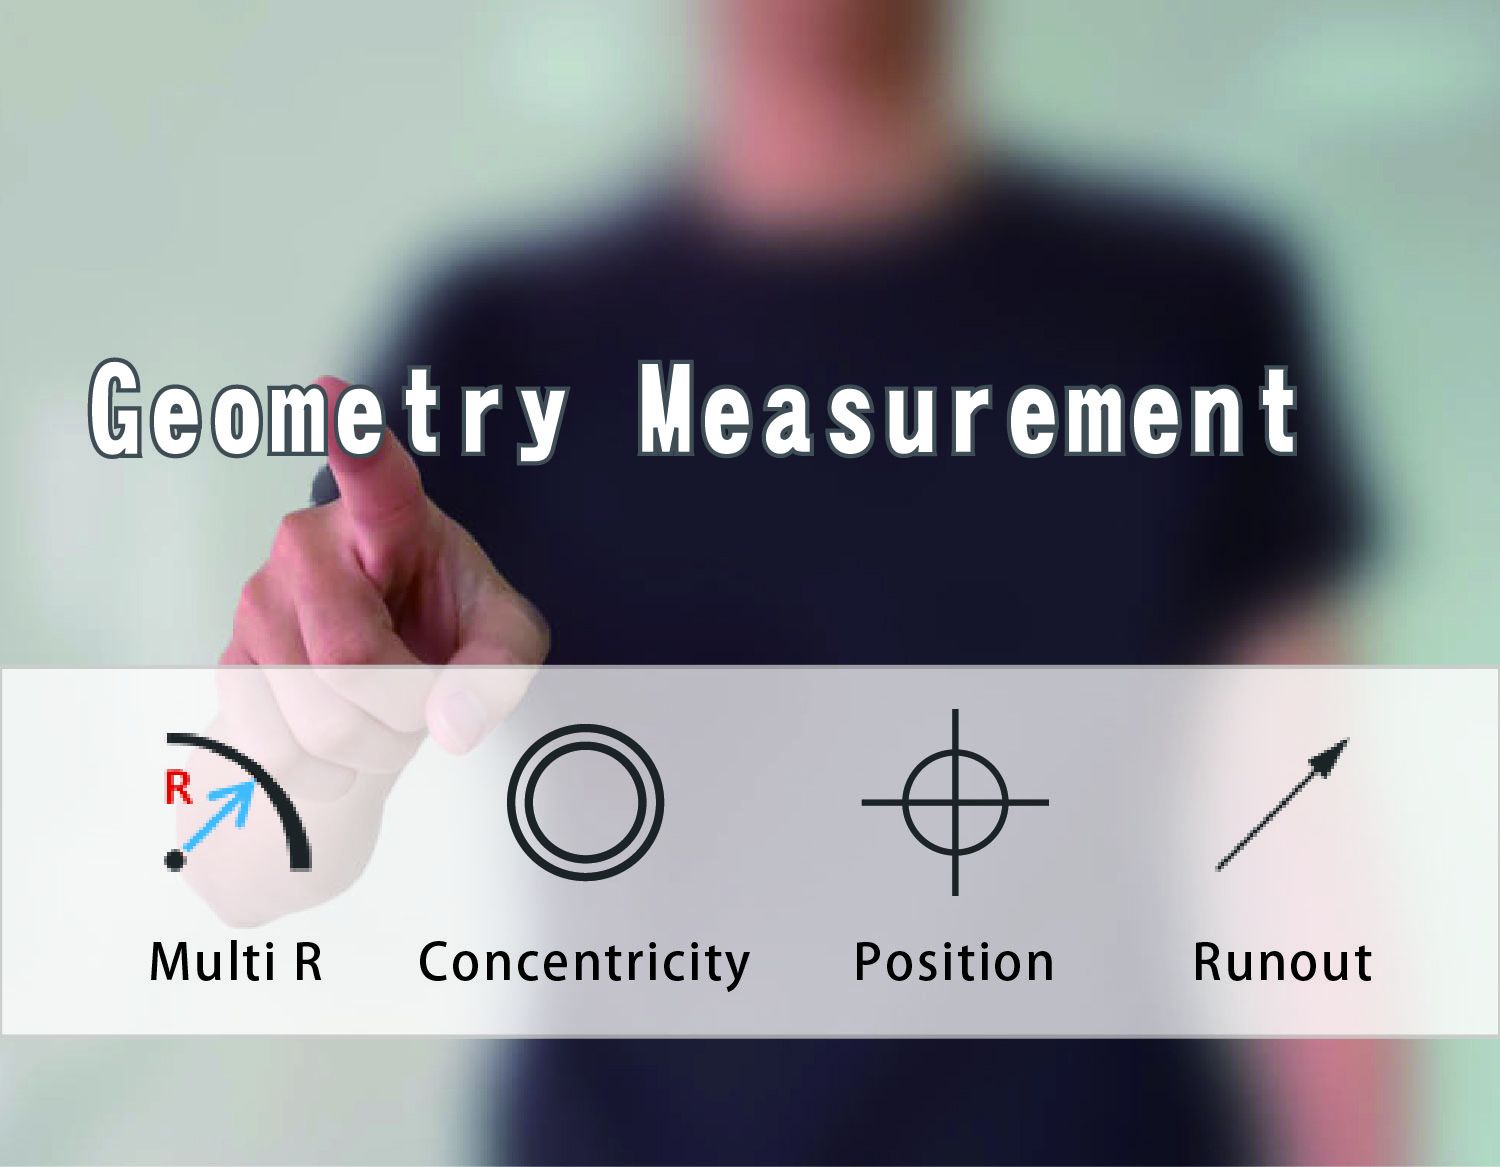 Excellent for Geometry Measurement